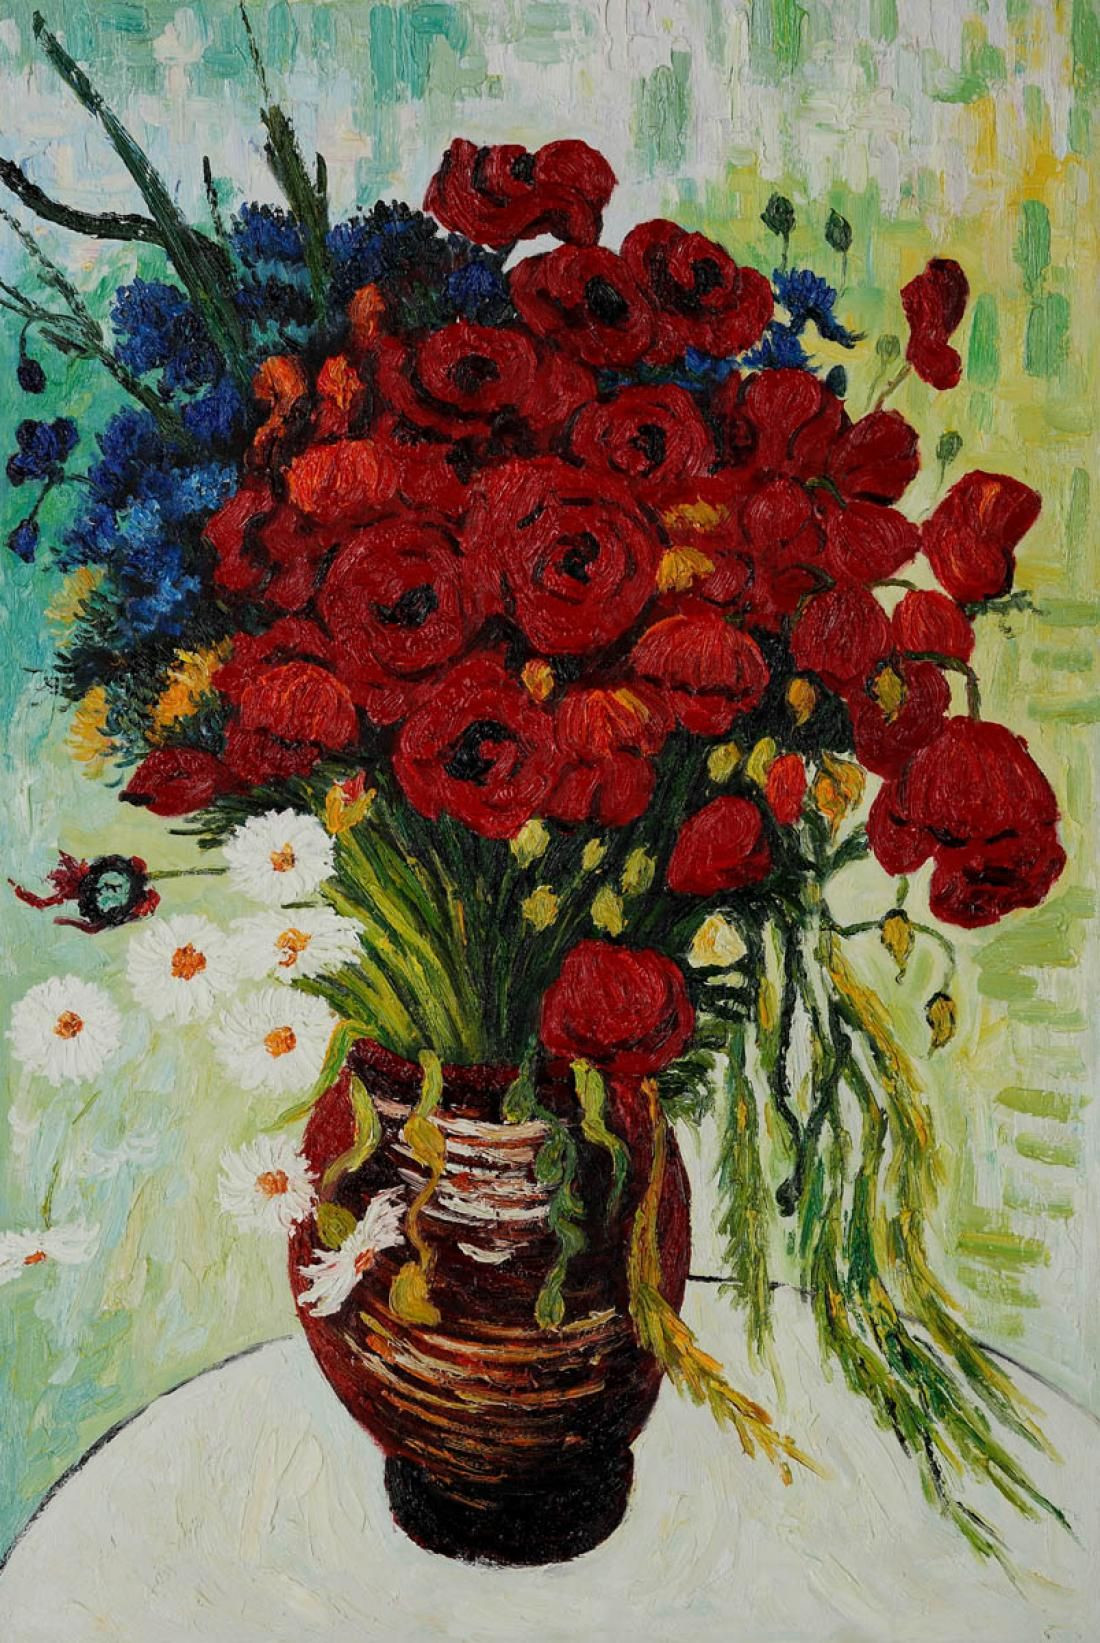 26 Amazing Vincent Van Gogh Vase with Cornflowers and Poppies 2024 free download vincent van gogh vase with cornflowers and poppies of van gogh vase with daisies and poppies this is very similar to throughout van gogh vase with daisies and poppies this is very similar to